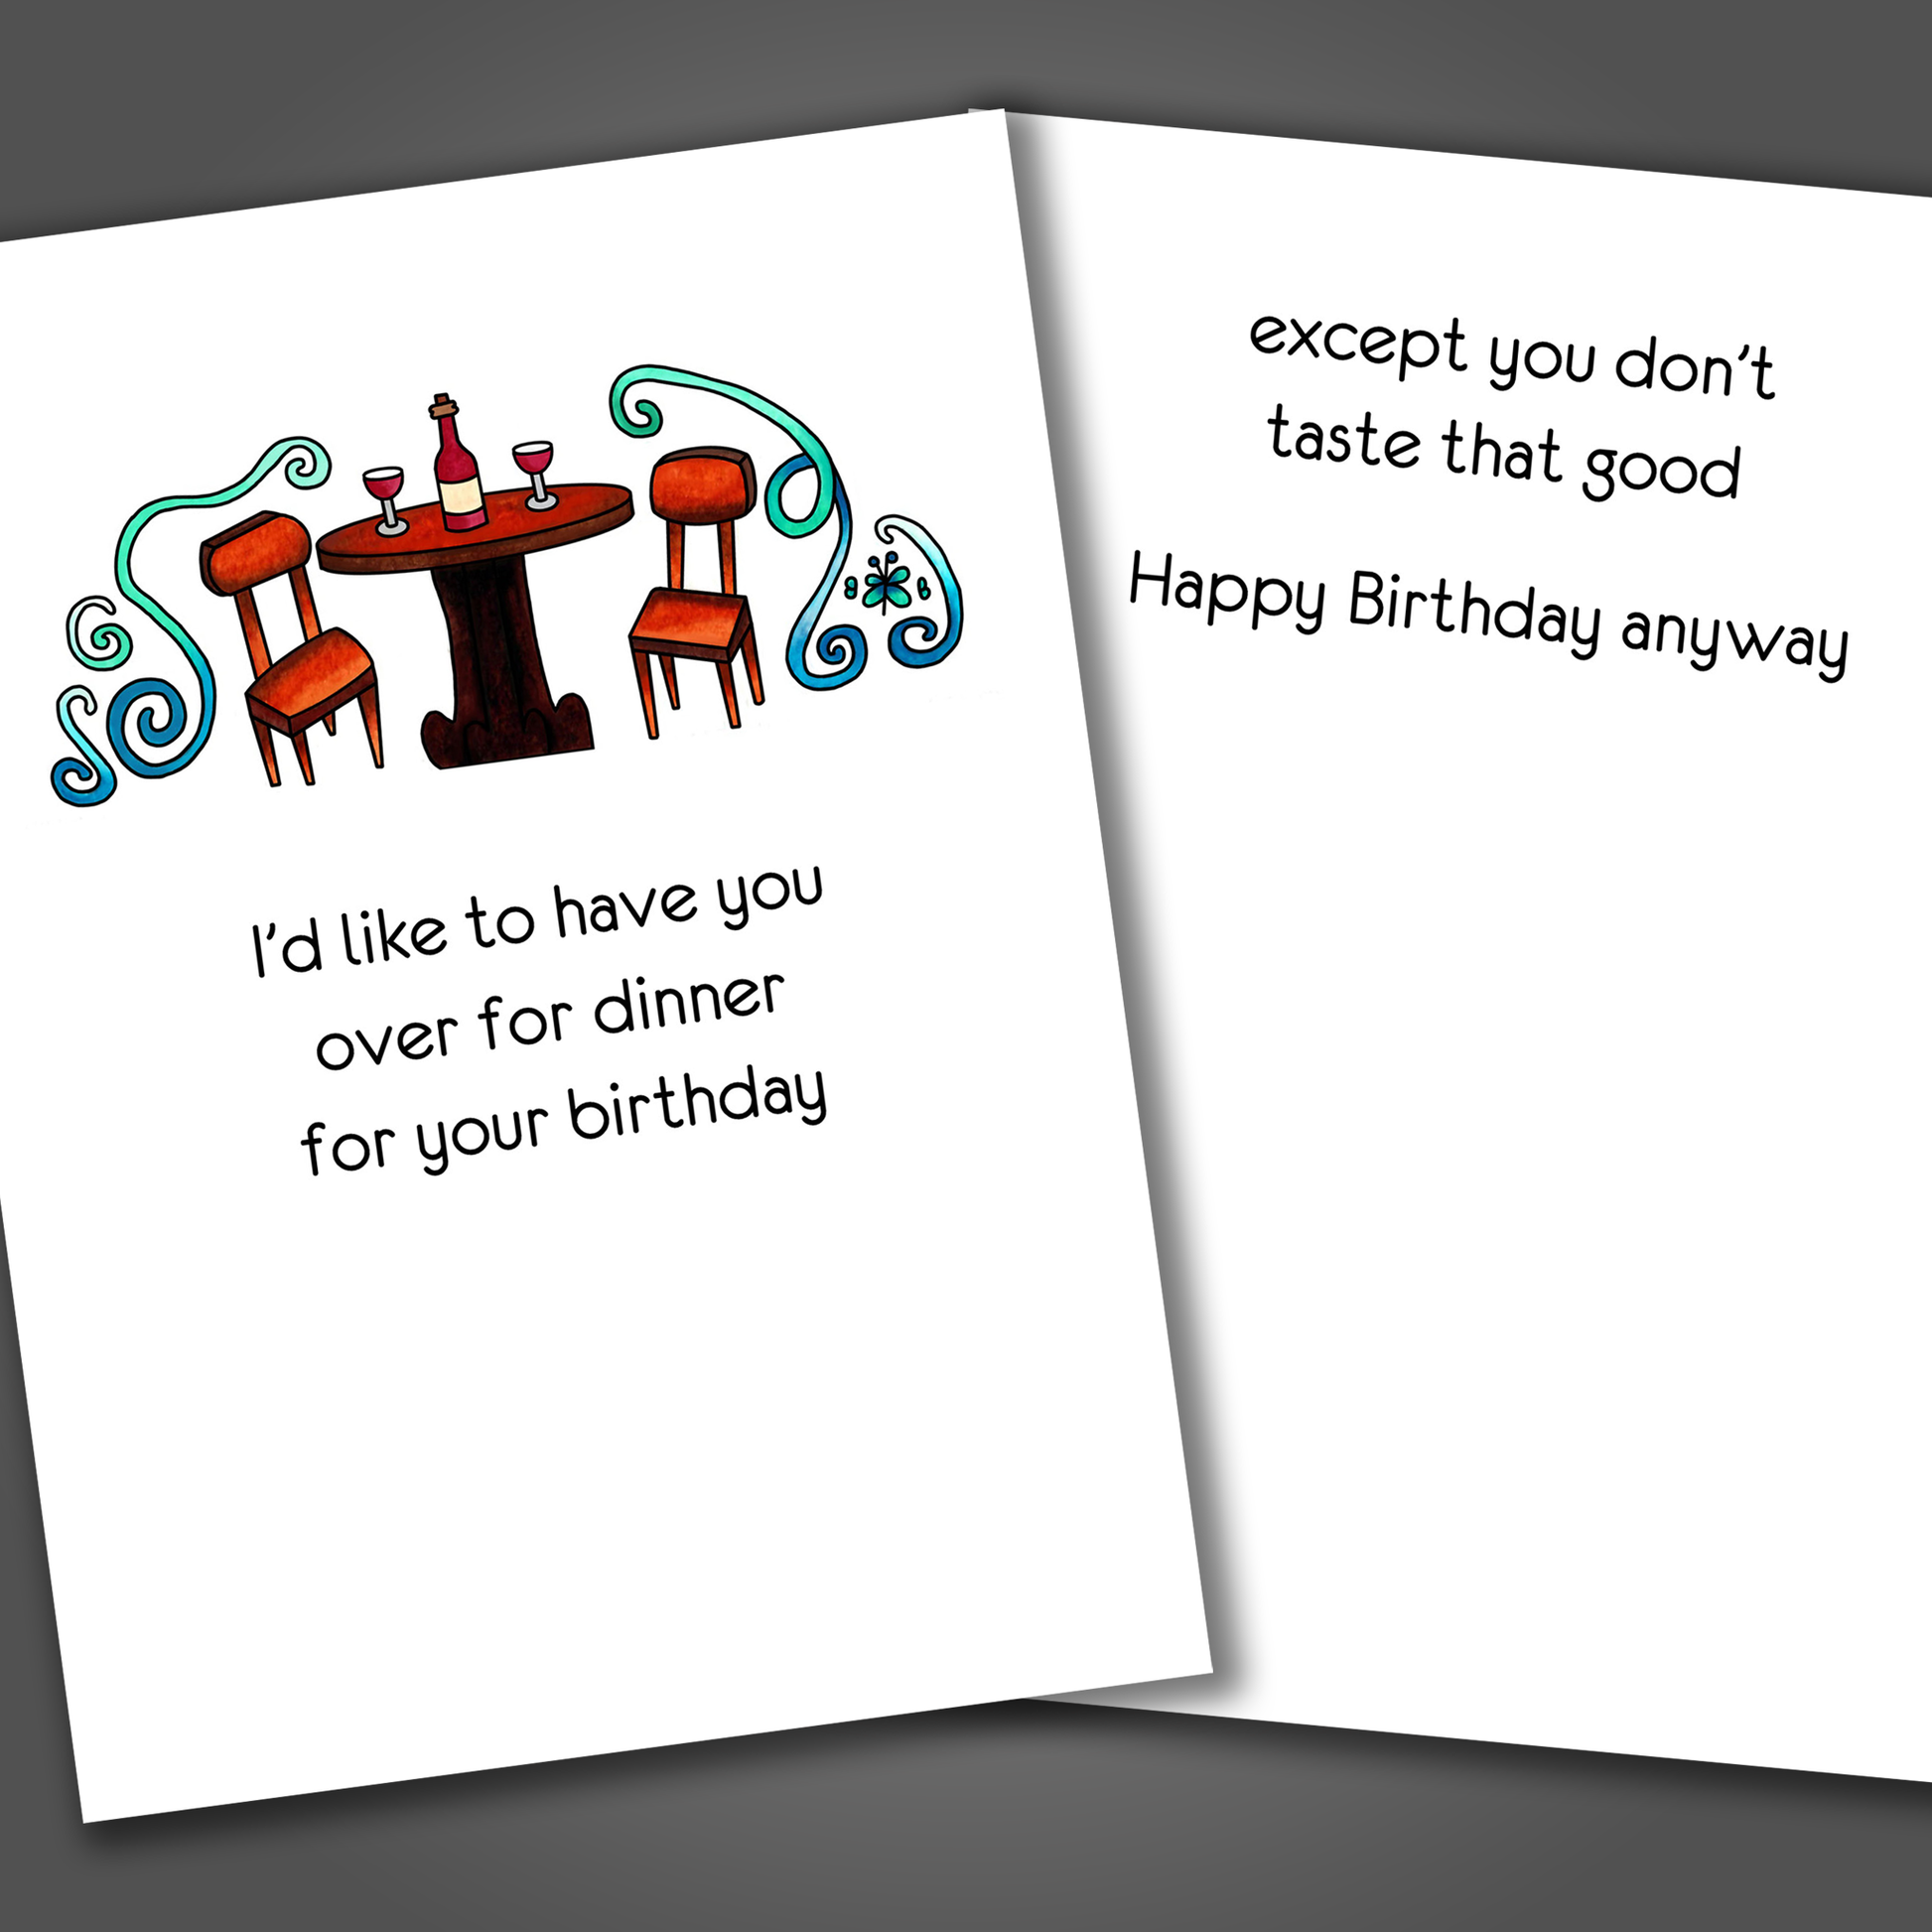 Funny happy birthday card with a table, chairs and wine drawn on the front of the card. Inside the card is a funny joke that says you don't taste that good!